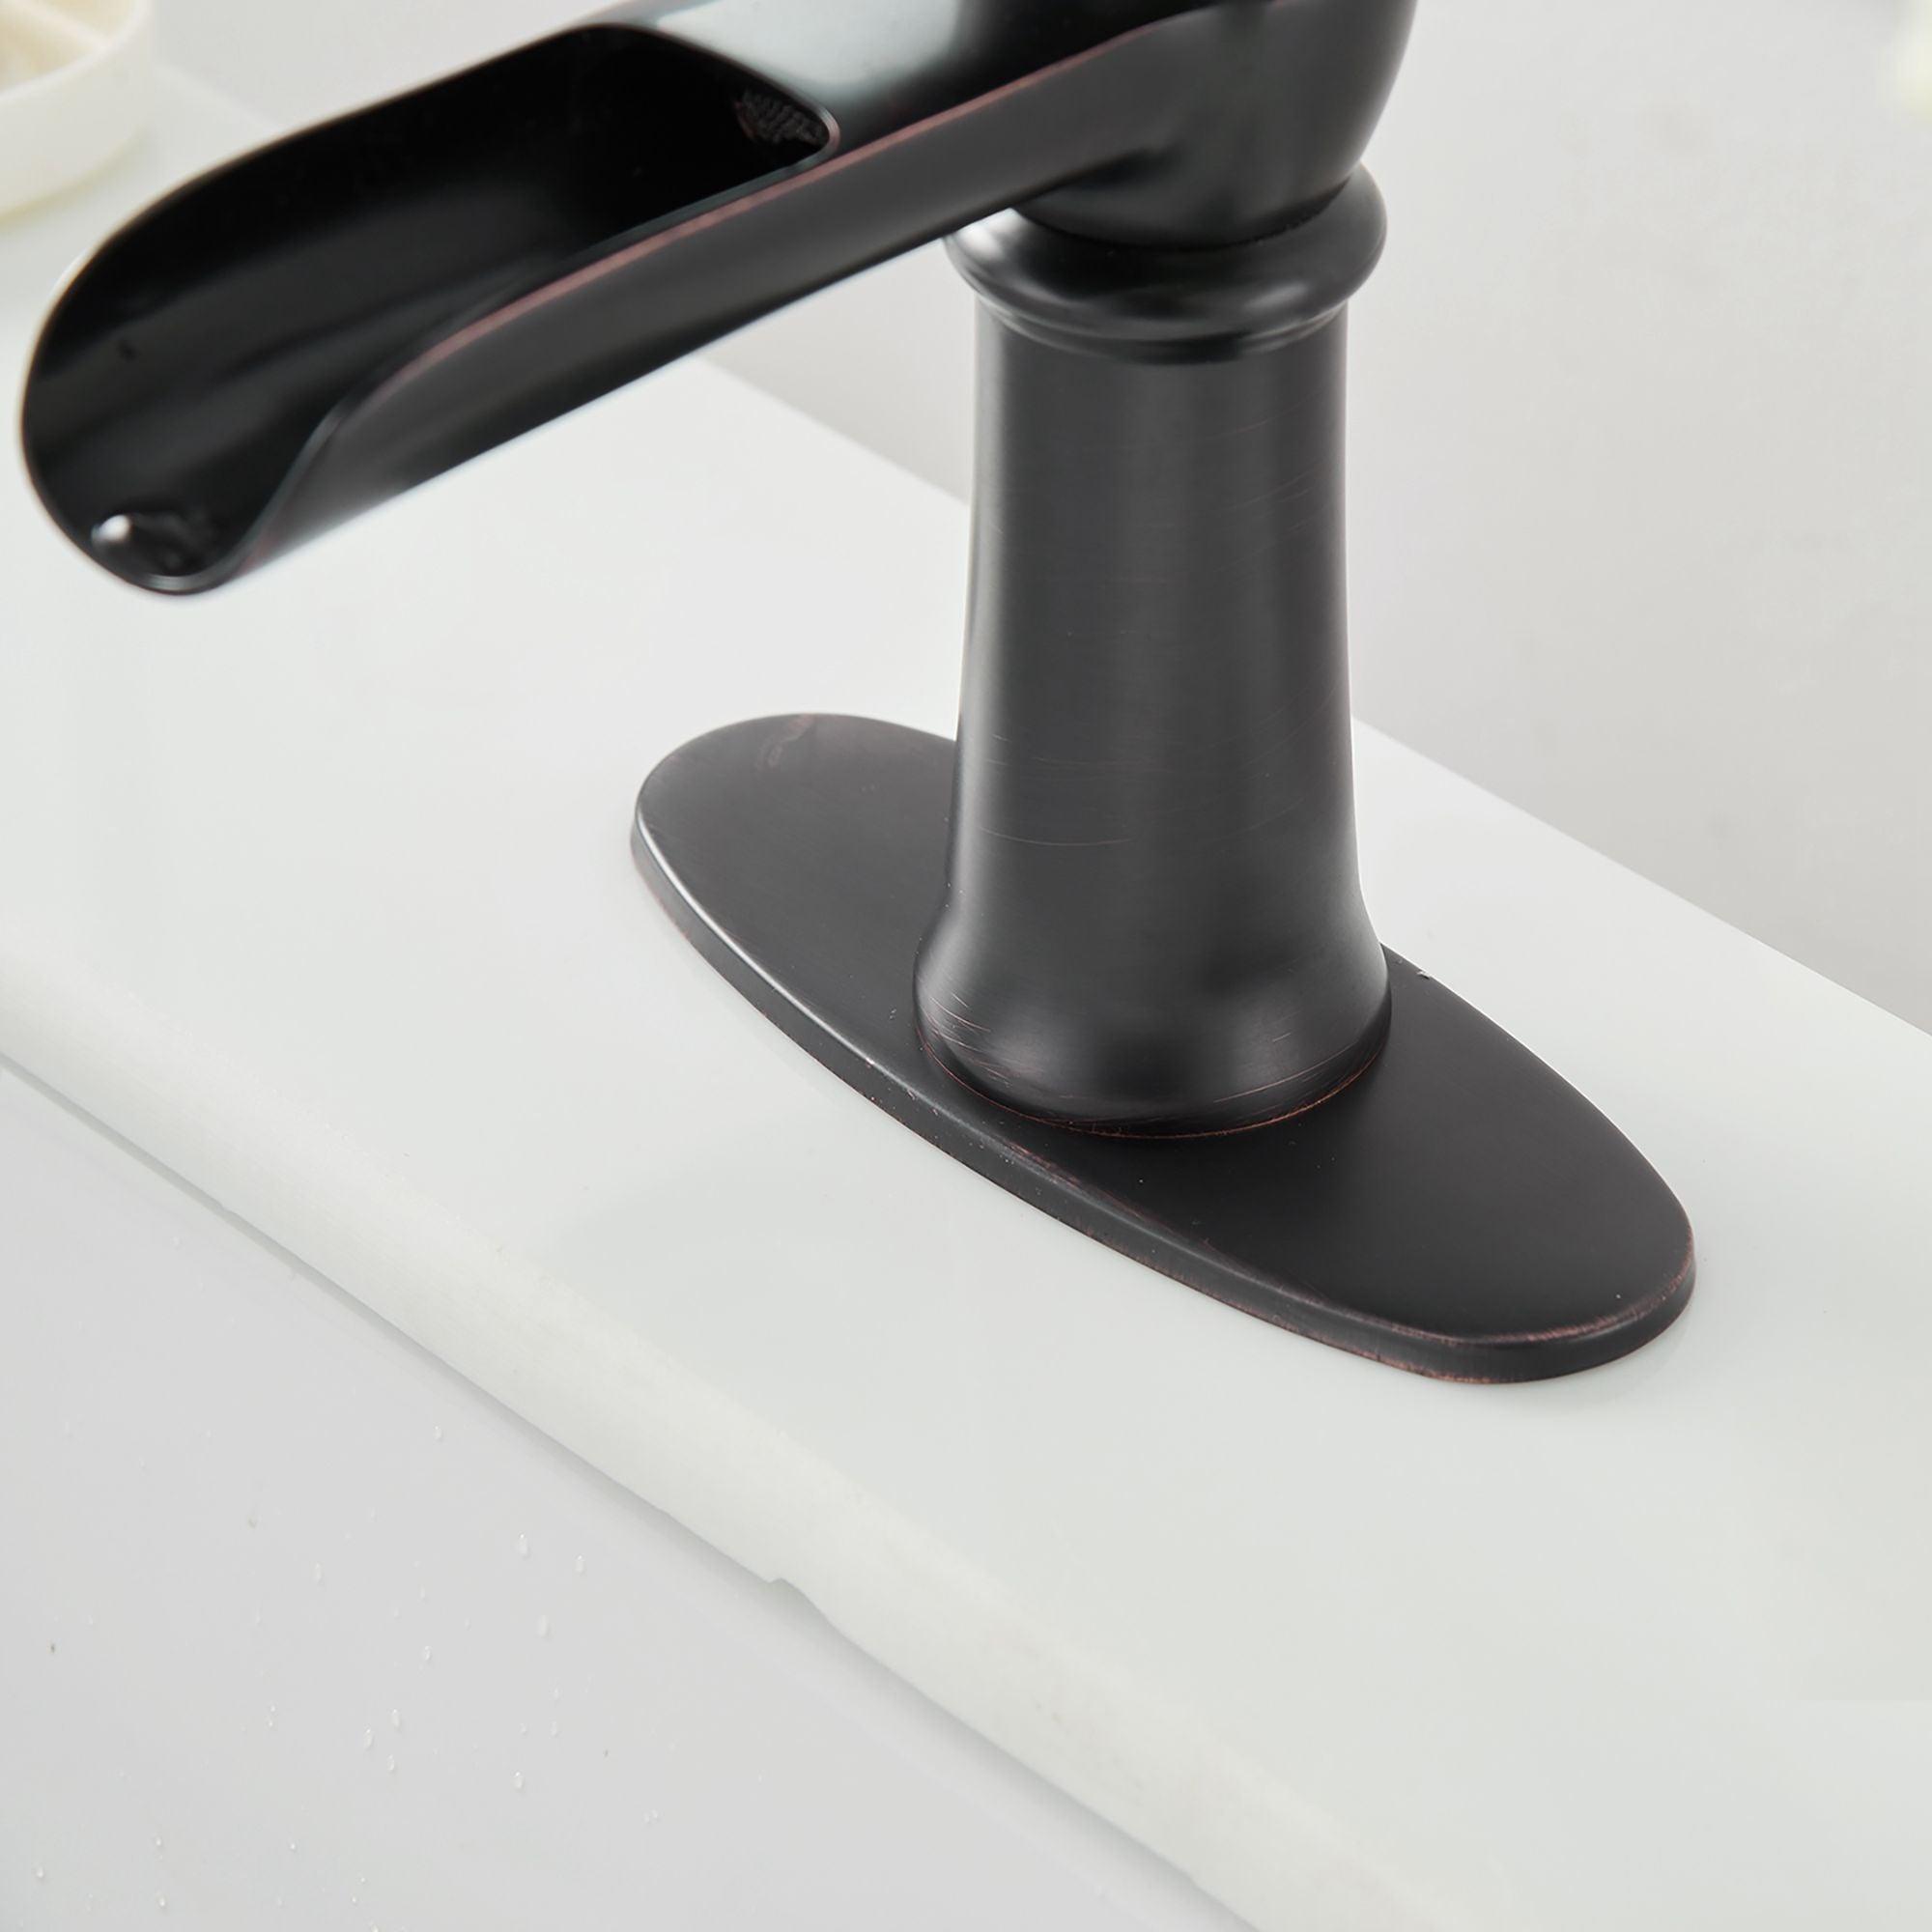 Parrot Uncle Oil Rubbed Bronze 1-handle Single Hole WaterSense High-arc Bathroom Sink Faucet with Deck Plate